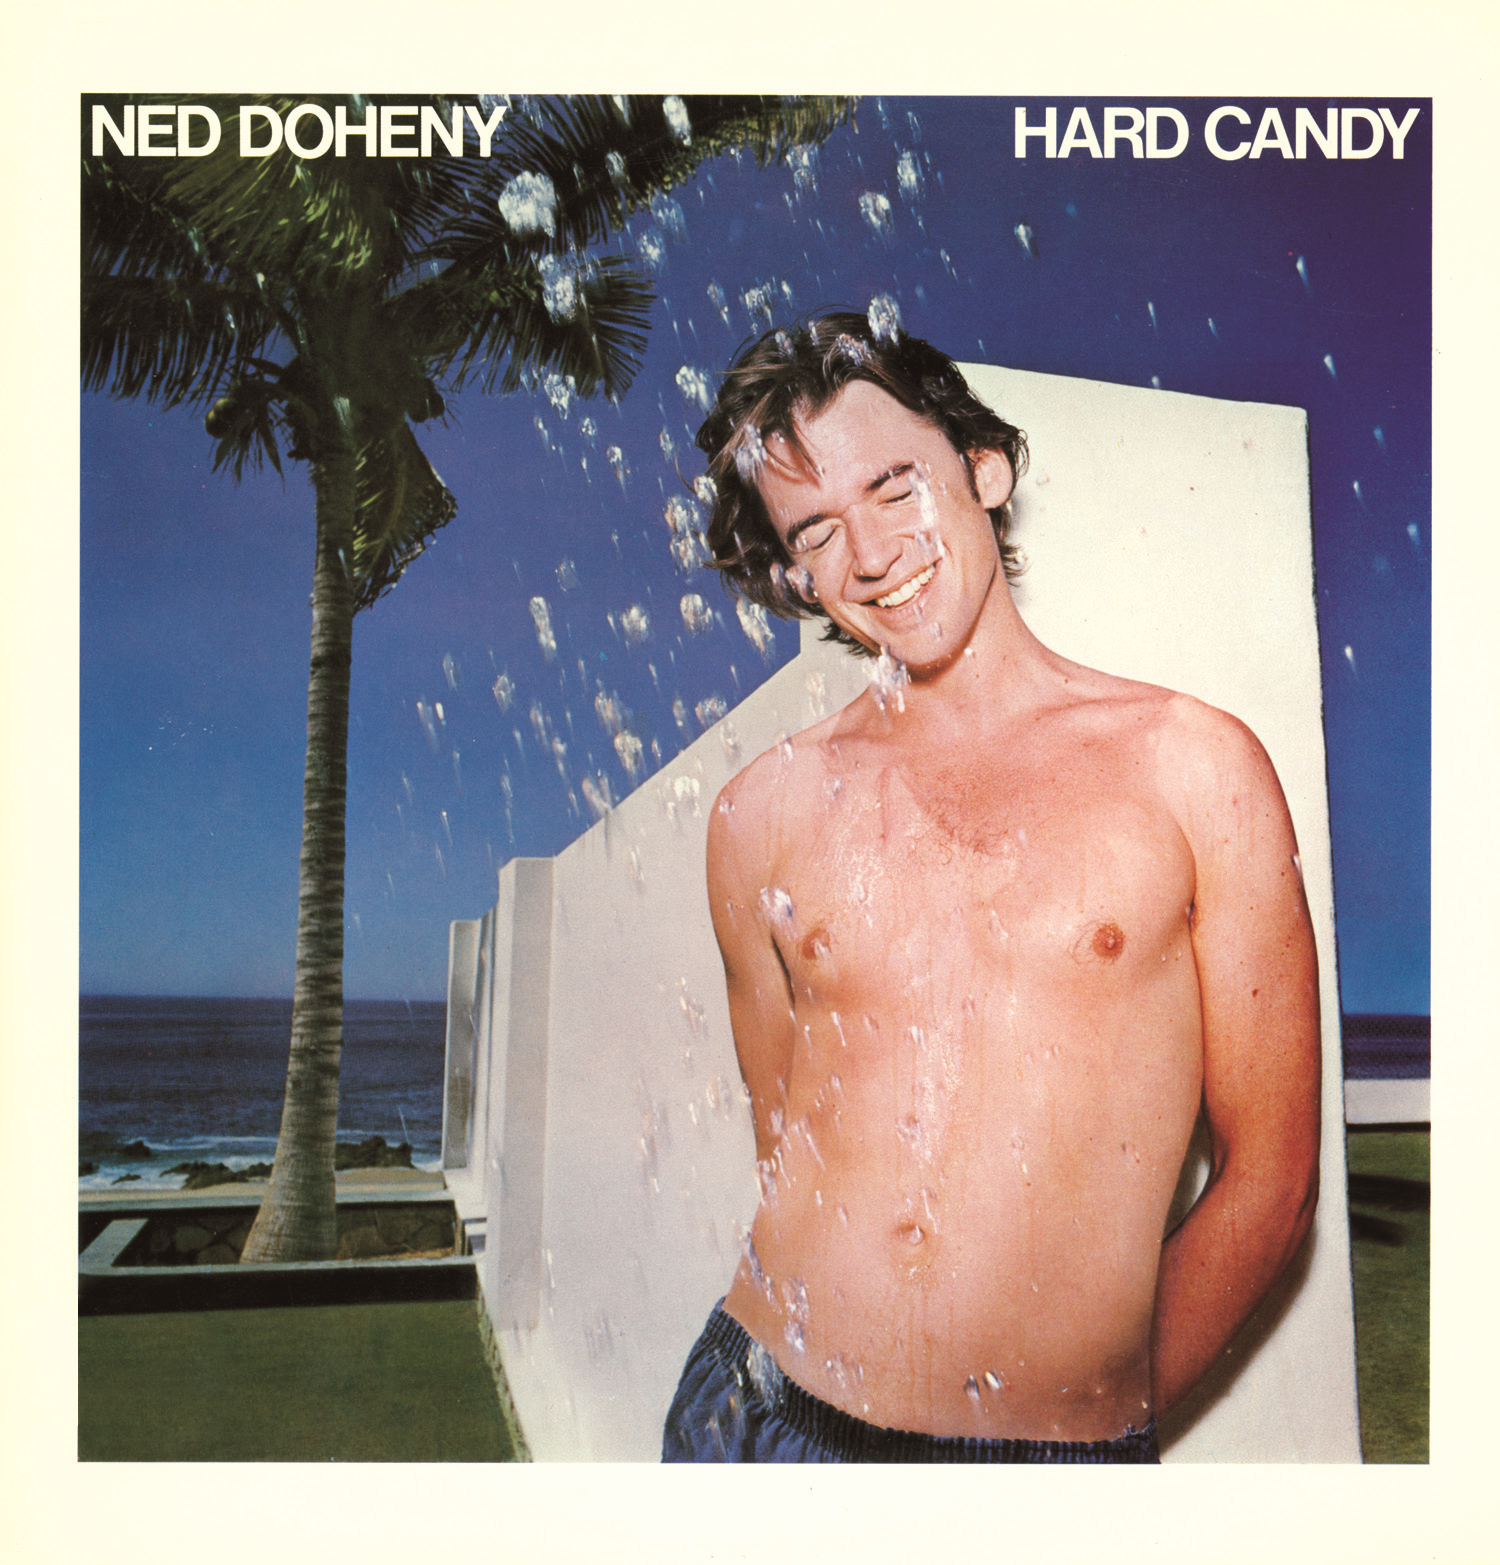 Ned Doheny, Interview, Geffen Records, Asylum , Hard Candy, Be With Records, Joni Mitchell, The Eagles